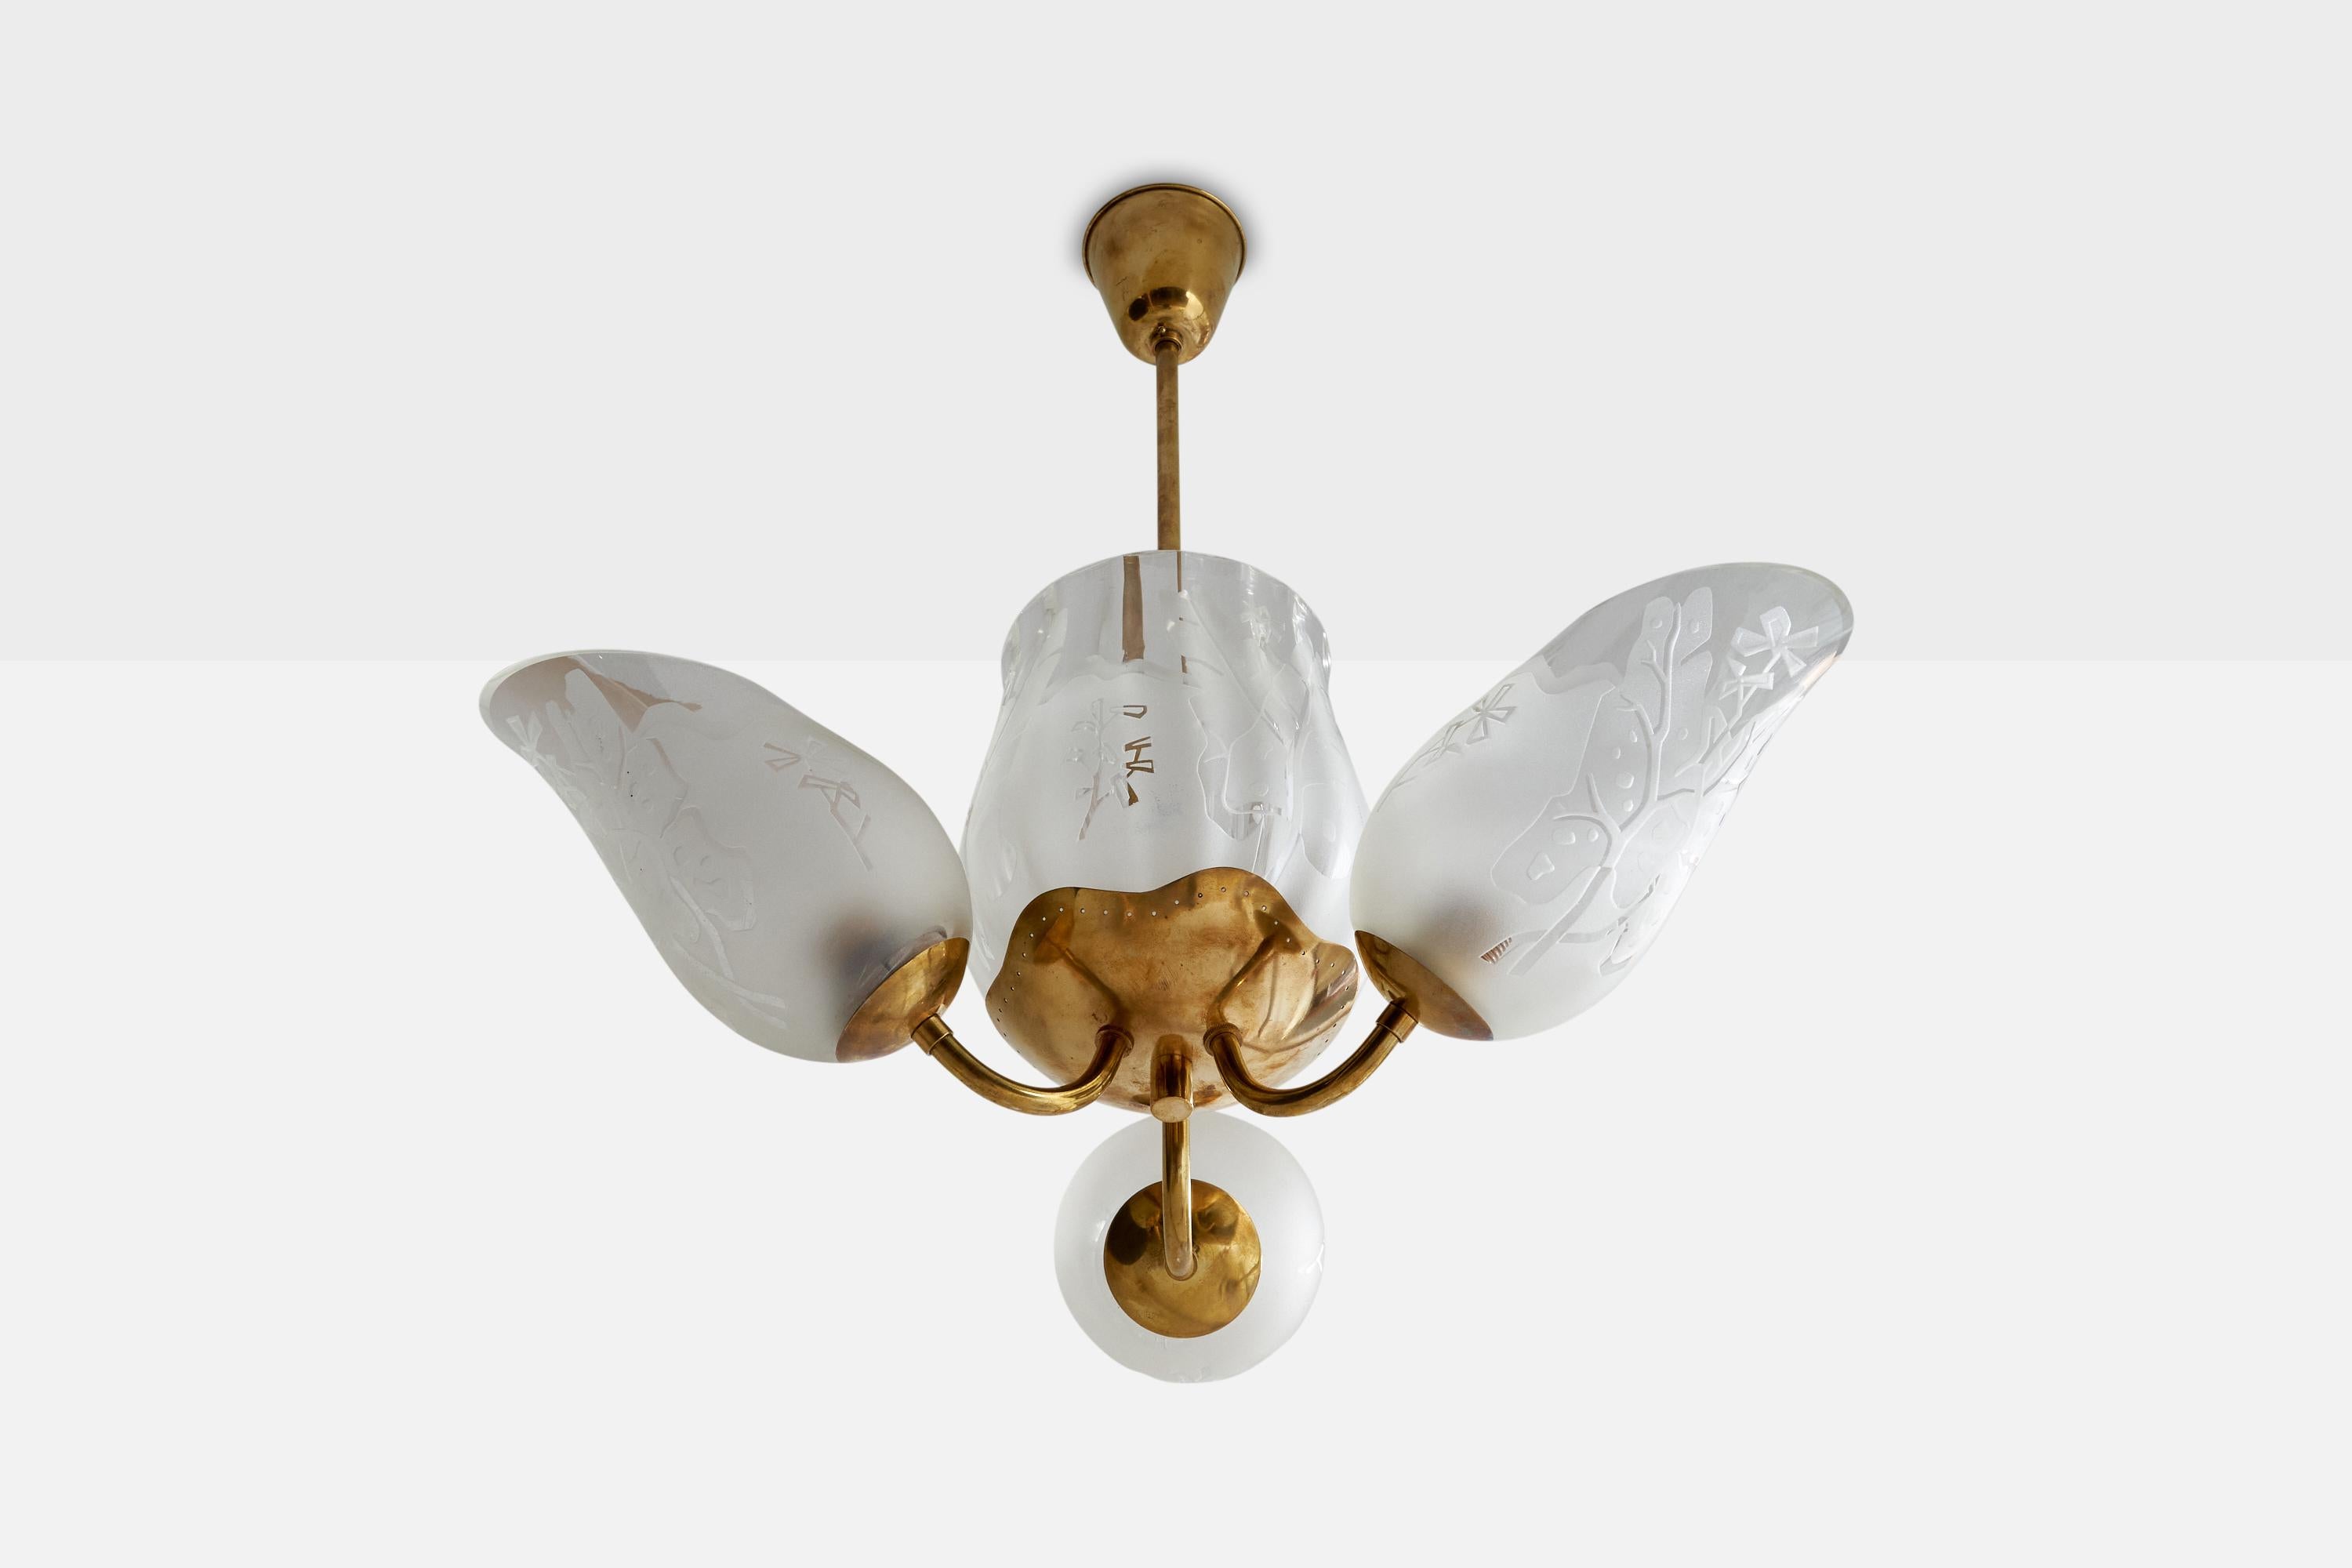 A brass and etched glass chandelier designed by Bo Notini and produced by Glössner & Co, Sweden, 1940s.

Dimensions of canopy (inches): 3.4” H x 3.8” Diameter
Socket takes standard E-26 bulbs. 5 sockets.There is no maximum wattage stated on the